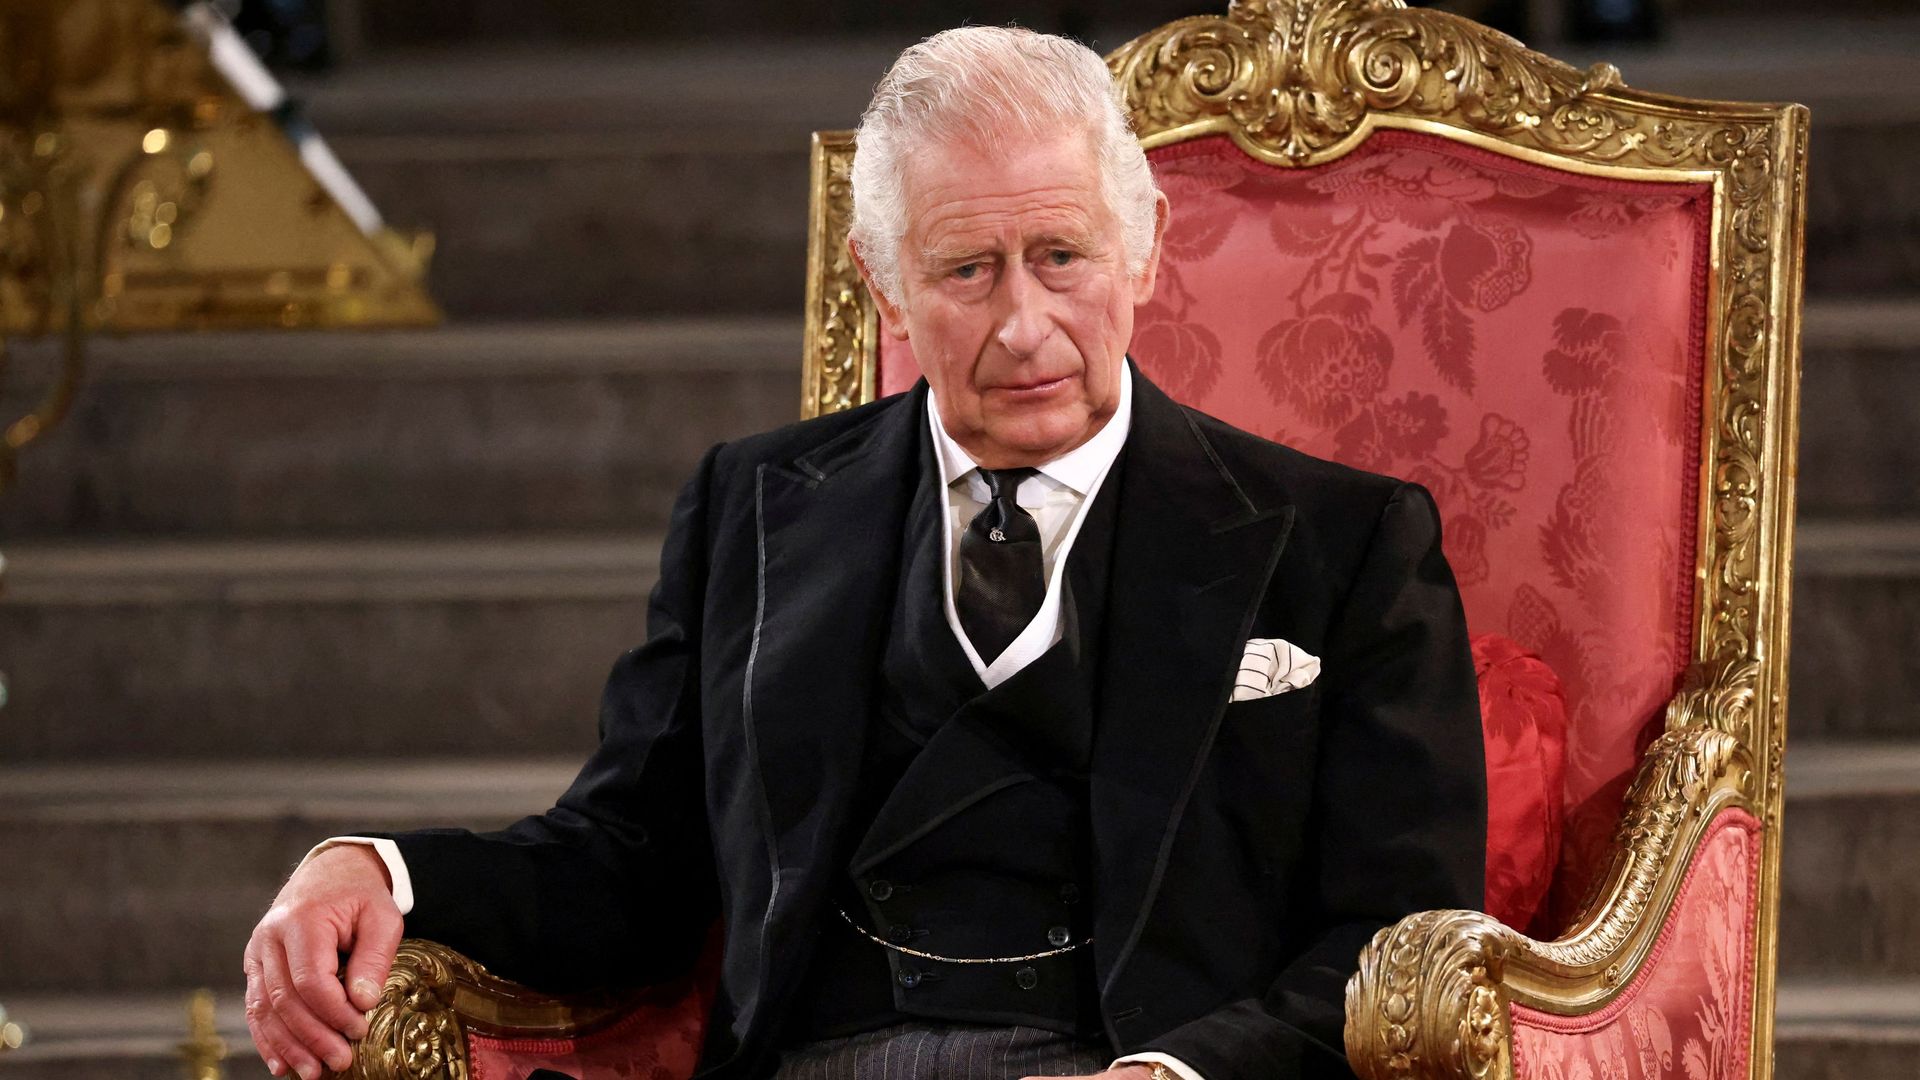 King Charles in a black suit on a red throne